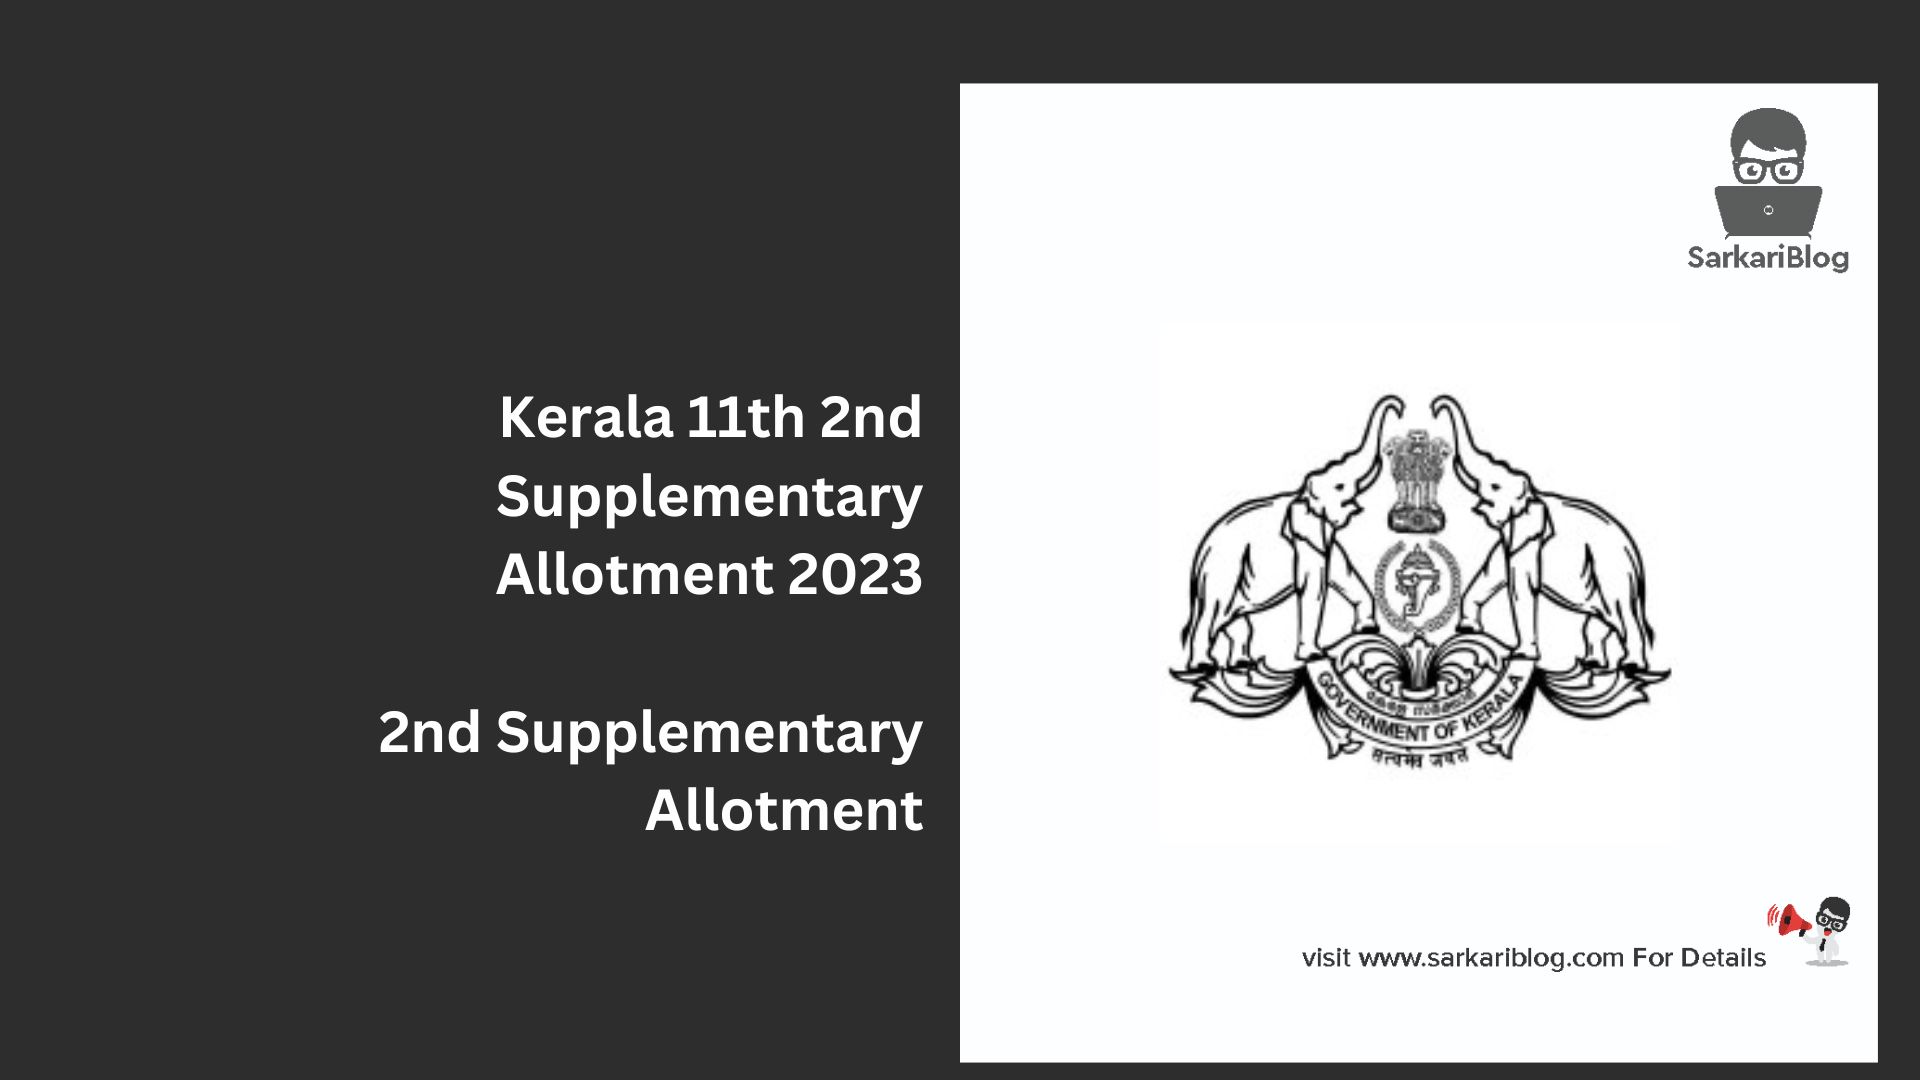 Kerala 11th 2nd Supplementary Allotment 2023